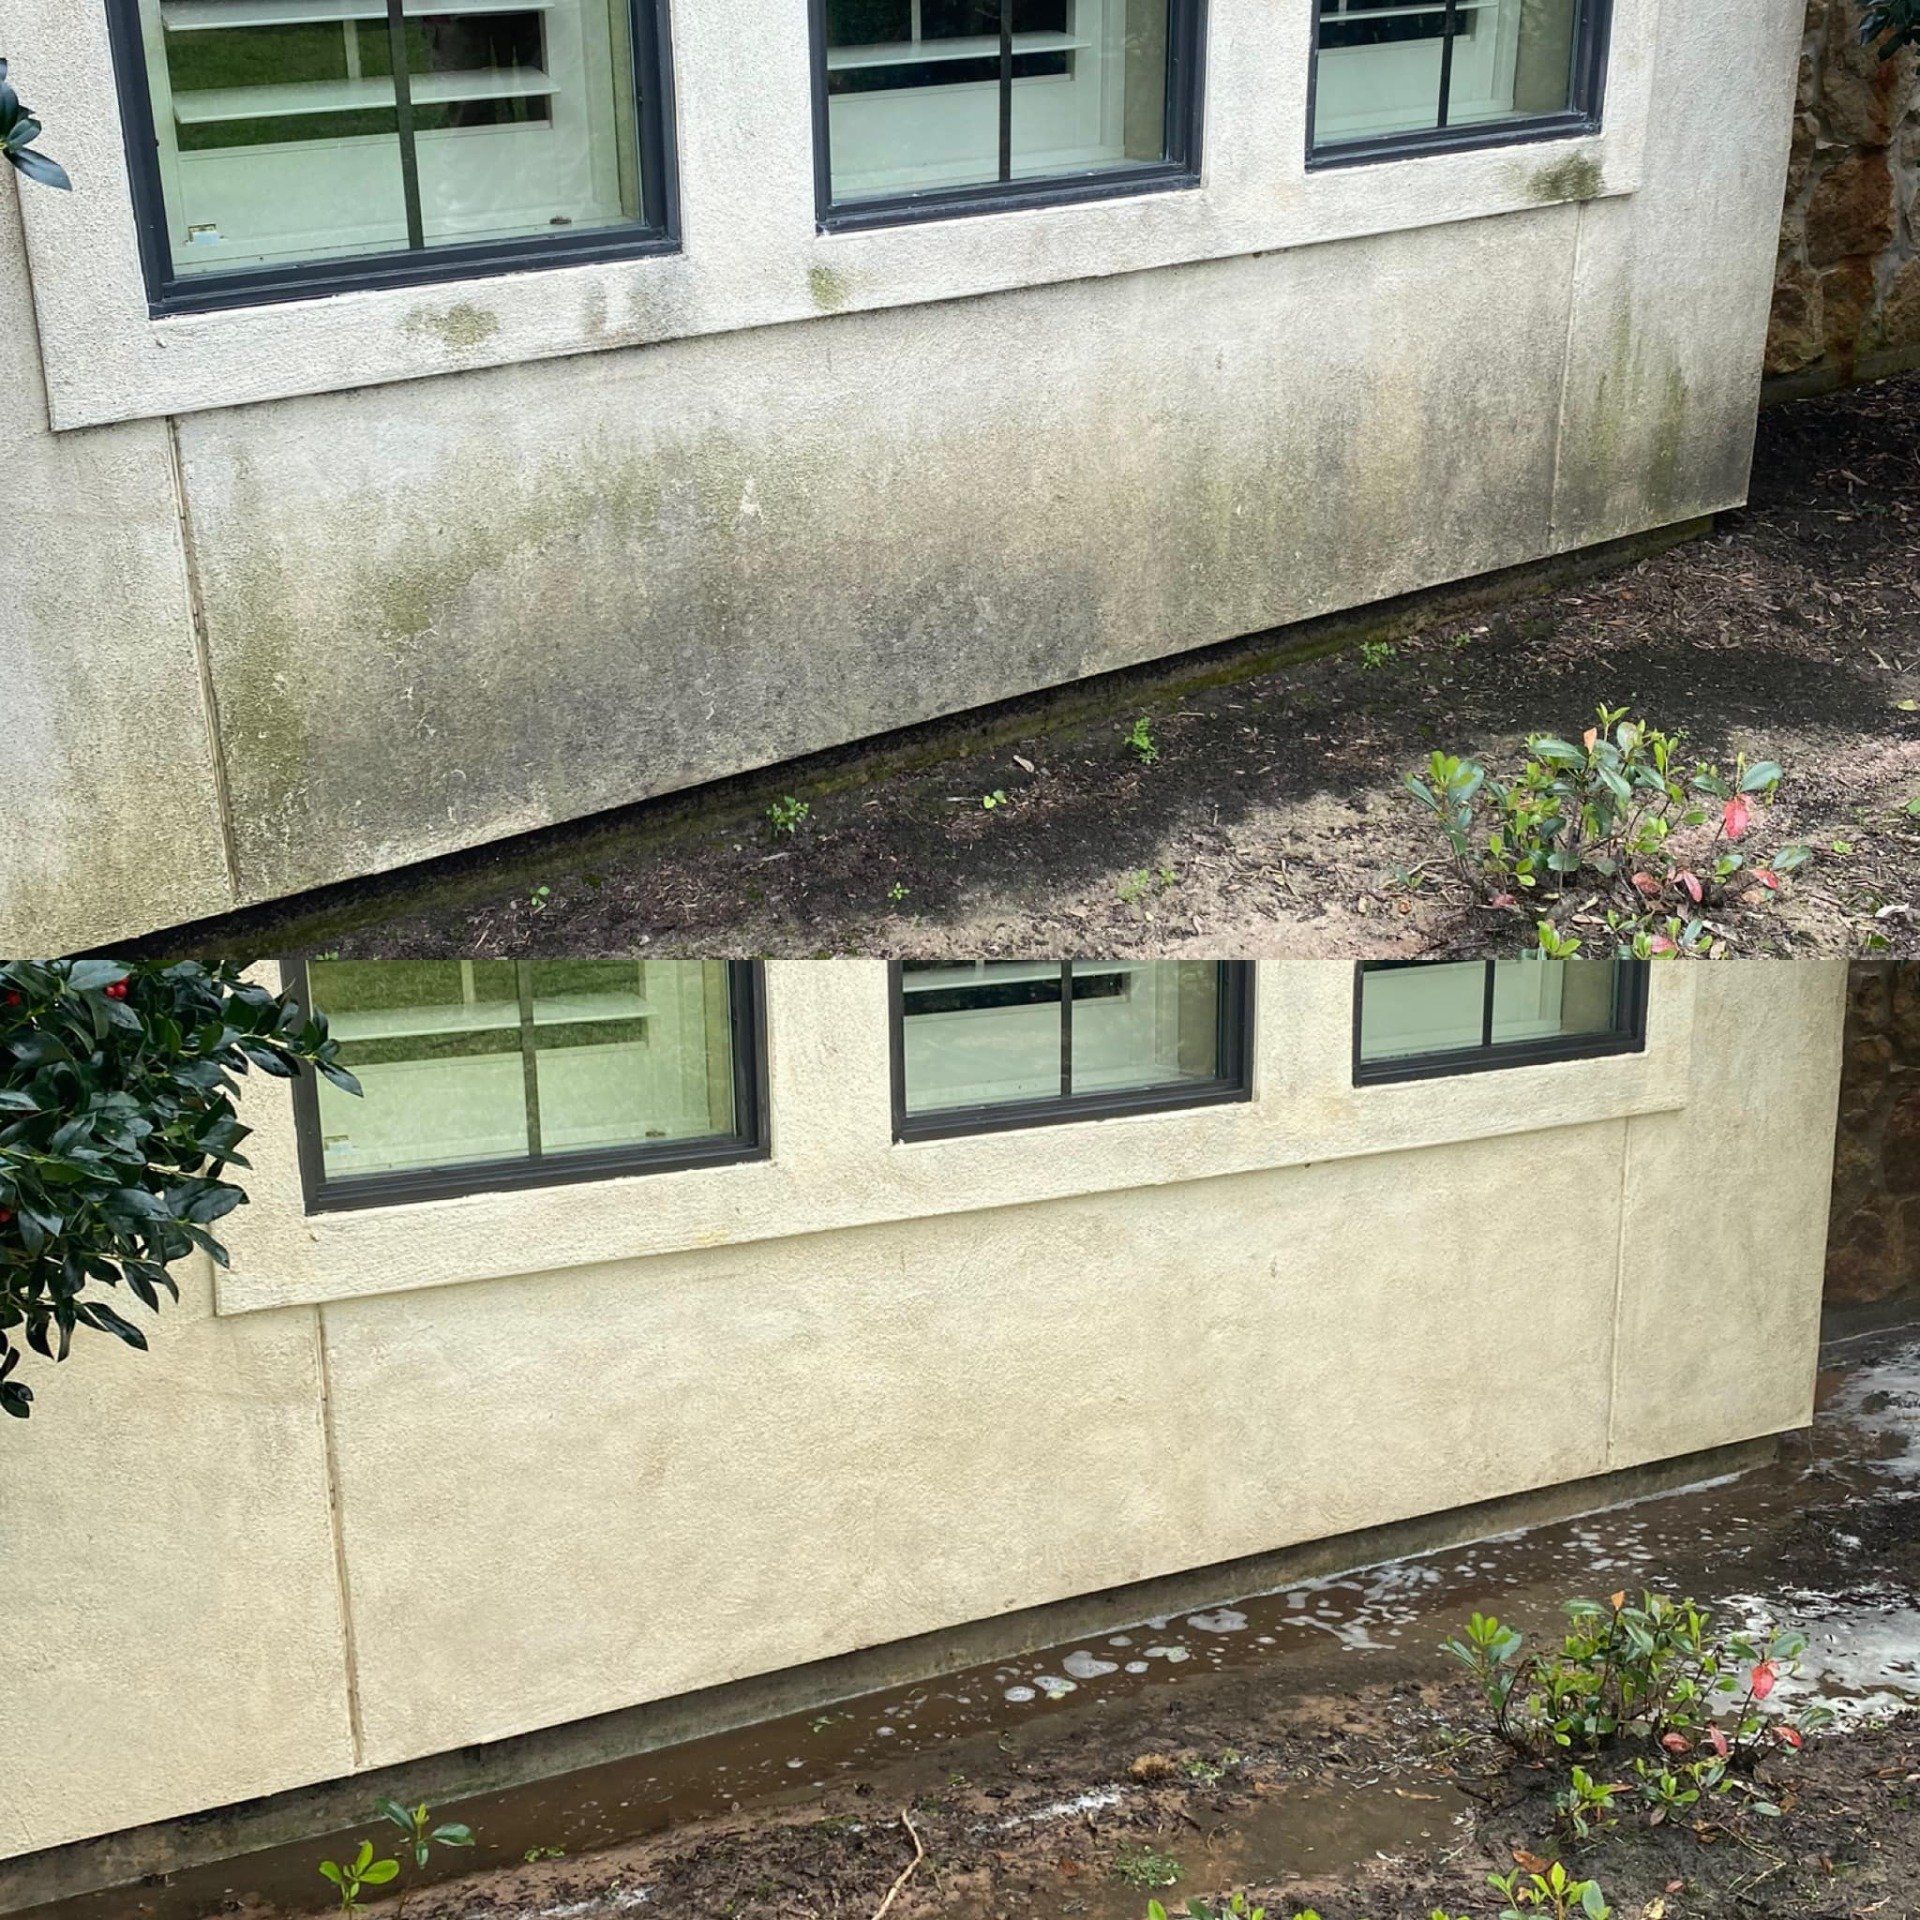 At Texan Exterior Cleaning, we clean your home by using a soft wash technique only. This means peace of mind when it comes to cleaning your most precious asset. You will not have to worry about any damage to your home due to high pressure. We apply a biodegradable mildicide solution to your home that eliminates organic growth such as mold, algae, lichen, moss, fungus, and mildew. After the solution is applied, it dwells for roughly five minutes before it is rinsed off with low pressure. By eliminating mold, algae, and mildew at its roots, we are ensuring a longer lasting result. Our solution is safe and effective on virtually any surface including: stucco, brick, wood, hardie plank, metal, travertine, stone, concrete, and much more.  It is important to keep one of your most valuable investments in the best shape by performing routine maintenance and cleanings. Soft washing your home can help increase the curb appeal of your property, whether you are looking to sell, comply with your local Home Owners Association, or to keep your home pristine.  Organic growth (such as mold, mildew, and algae) and other external pollutants (pollen, smoke stains, mud from pets) can cause permanent damage to your home.  Our certified technicians have over 15 years of experience in the industry and are trained to use our professional equipment and all of the most up to date techniques to ensure your home is left looking better than ever.